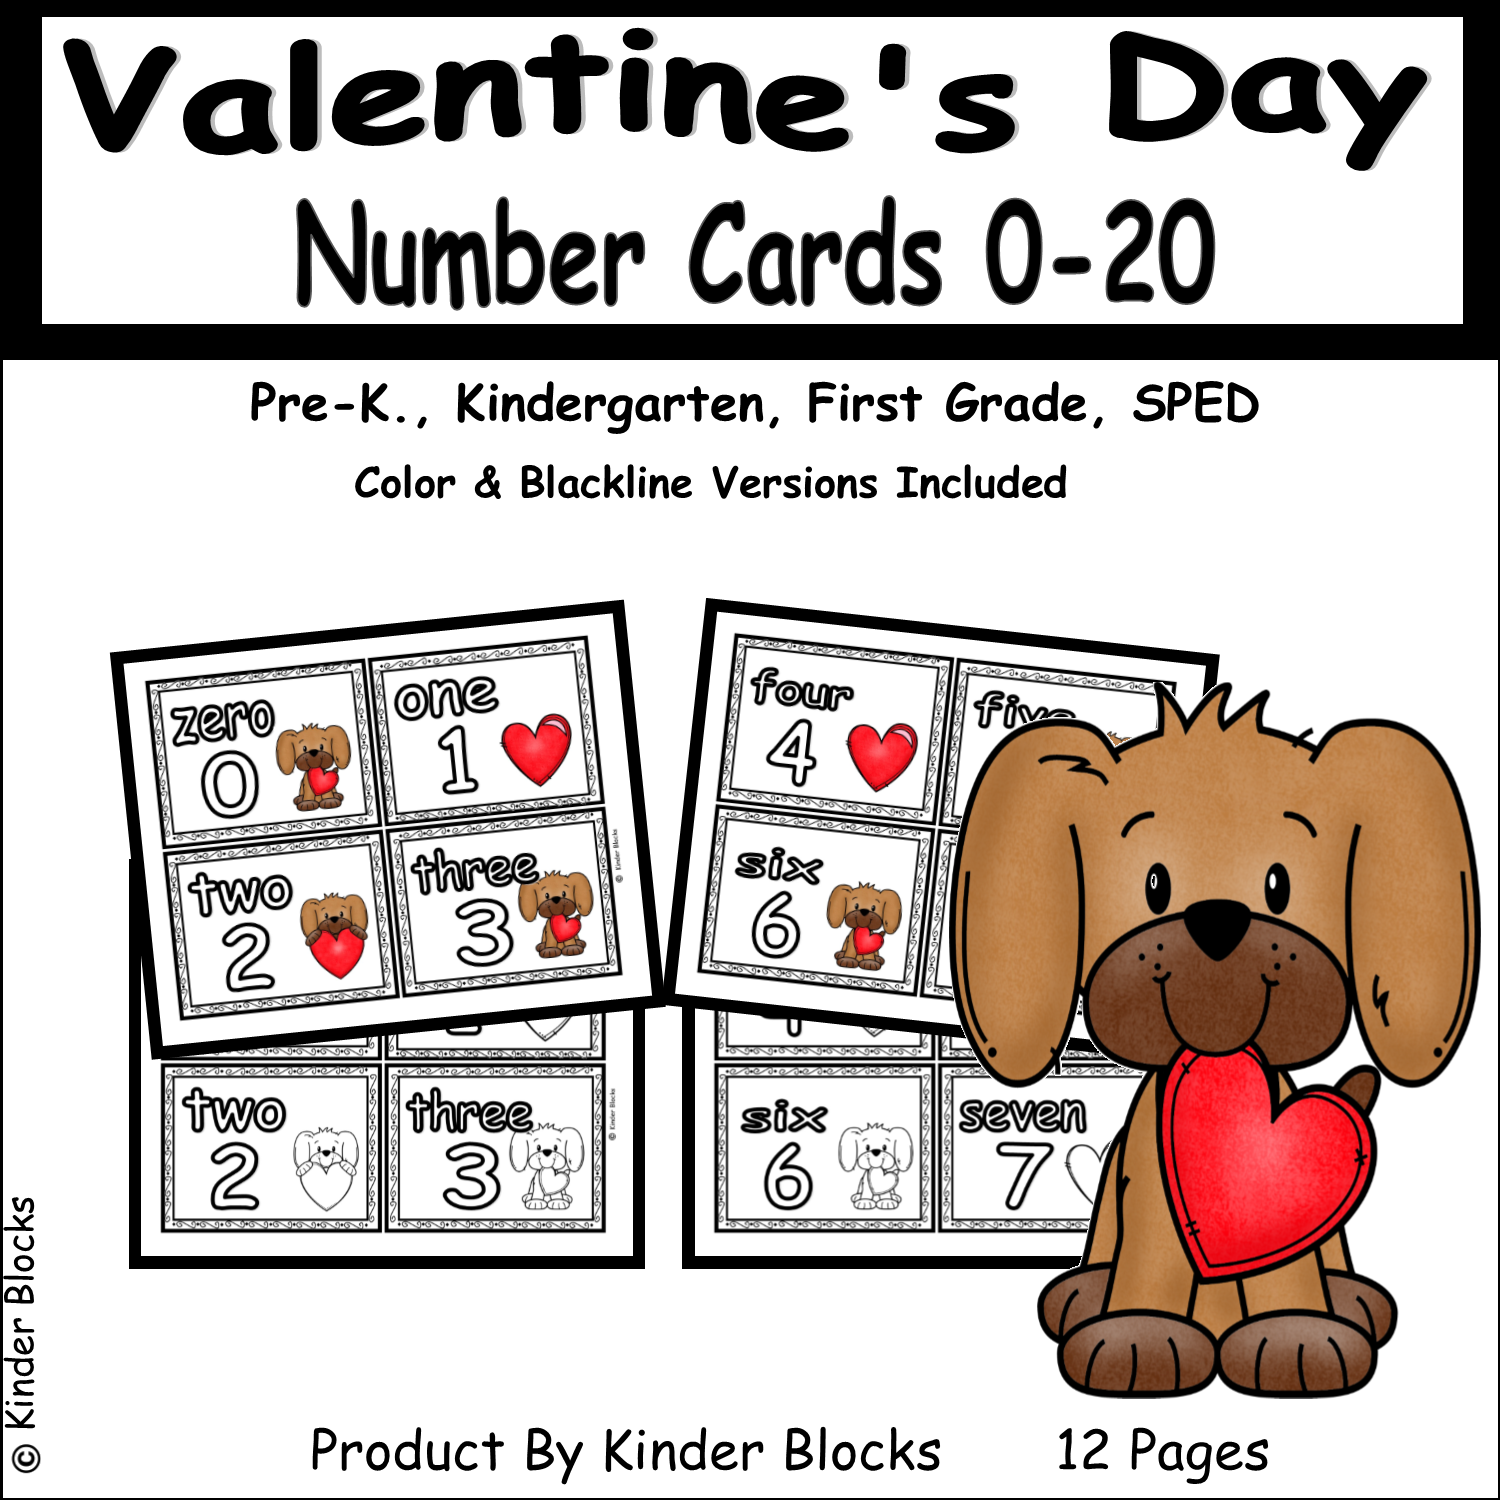 Valentine's Day Number Cards 0 - 20